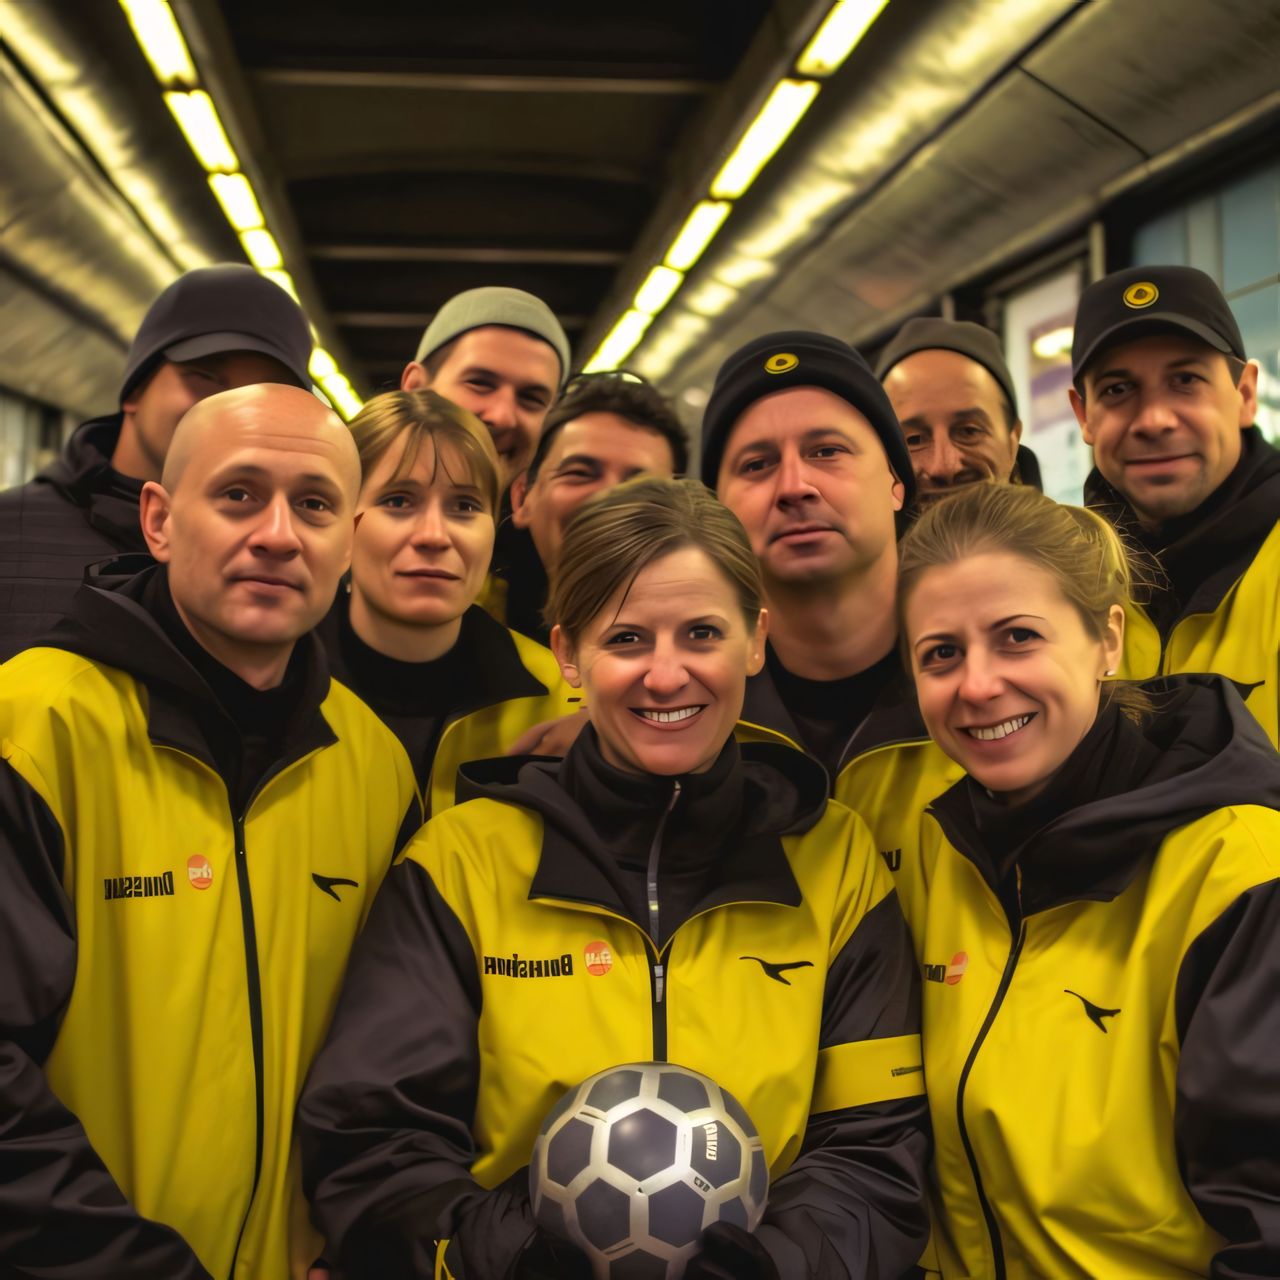 Group photo of employees supporting the soccer staff in uniform jackets with a ball on the bus. March as Employee Appreciation Day A time of celebration by employees of companies. Team Teamwork Employee Team Building Employee Appreciation Day Group People Family Woman Friends Smiling Students Smile Men Business Teen Student Friendship Together Crowd Happiness person Casual Teenager Education Party Togetherness Fun Joy Collaboration SUPPORT Corporate Partnership Cooperation Success Communication Appreciation Development Leadership Building